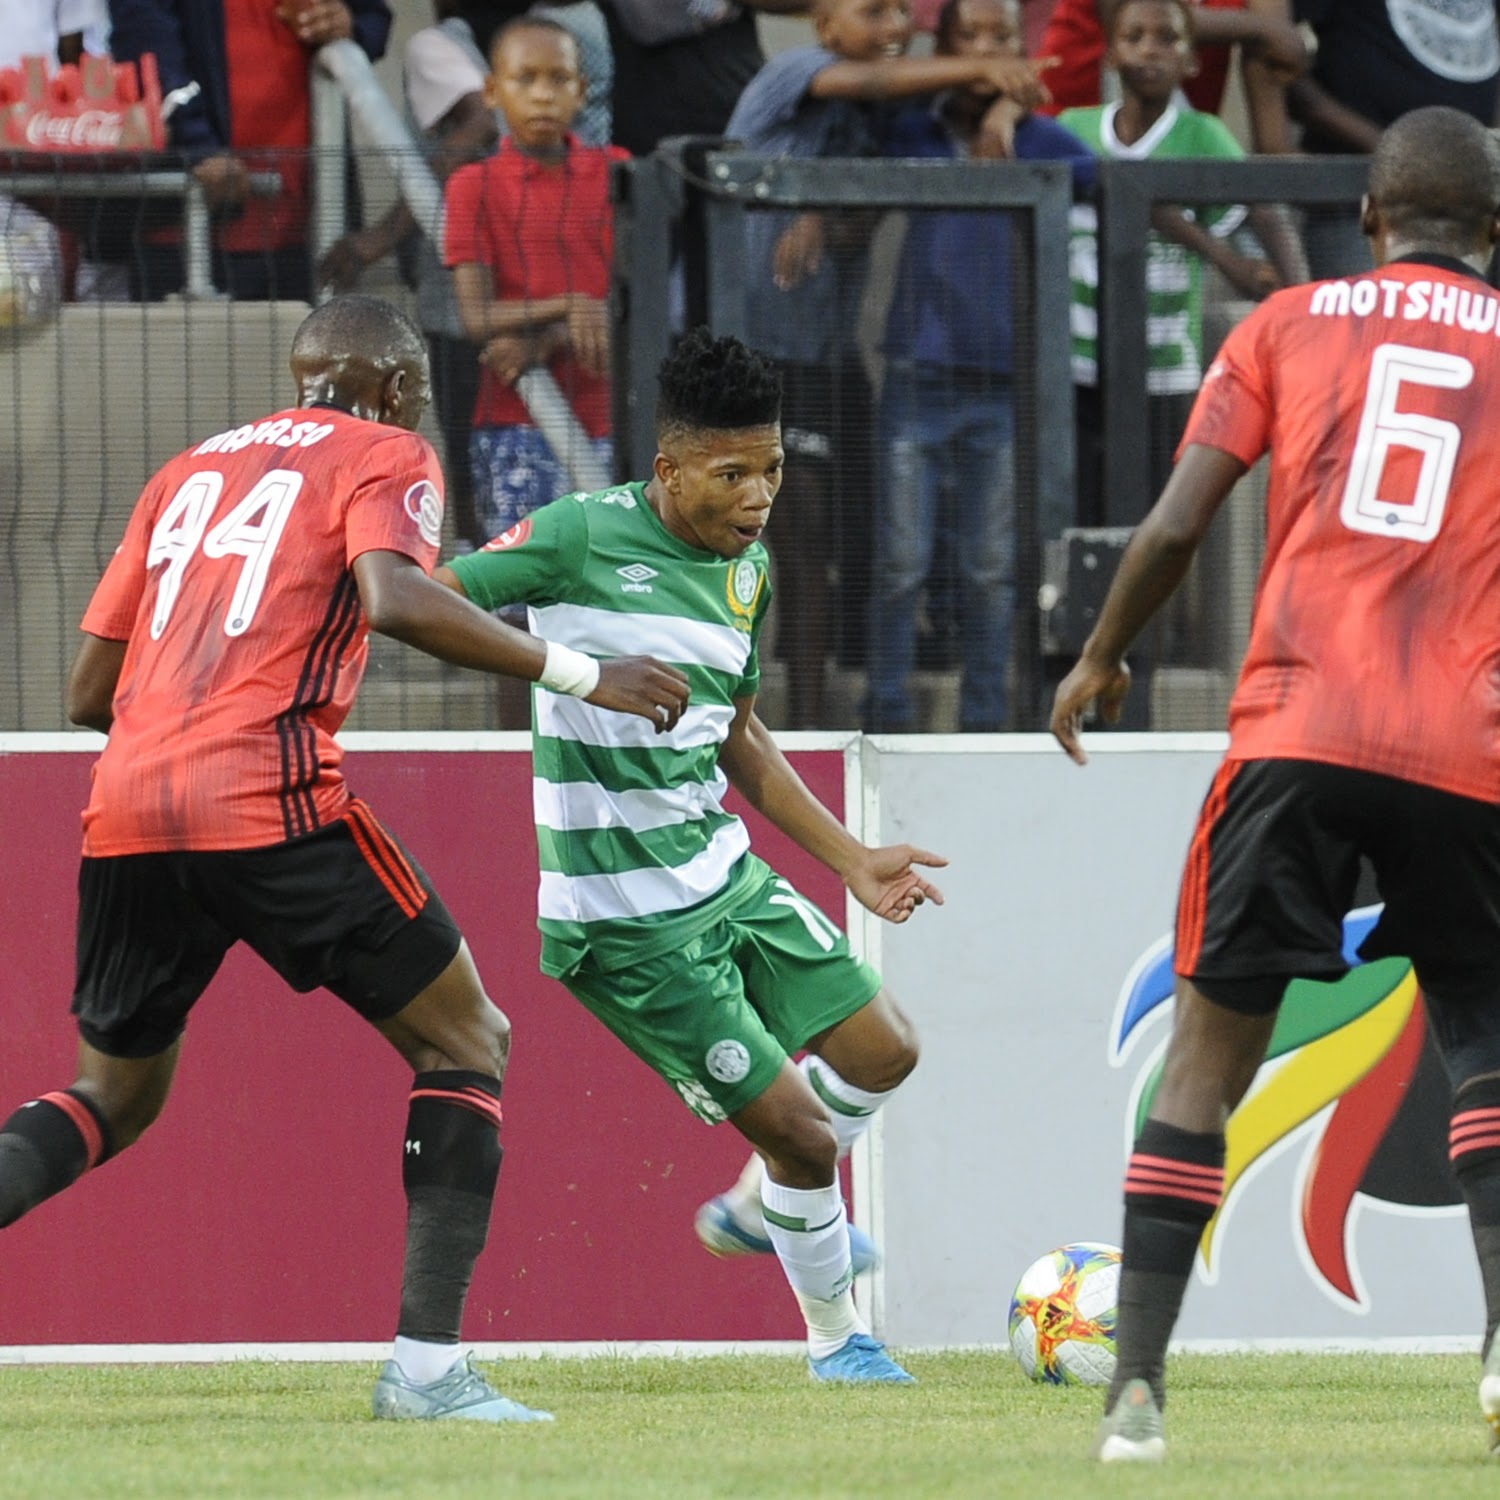 Bloemfontein Celtic: Latest news, transfers, fixtures results and